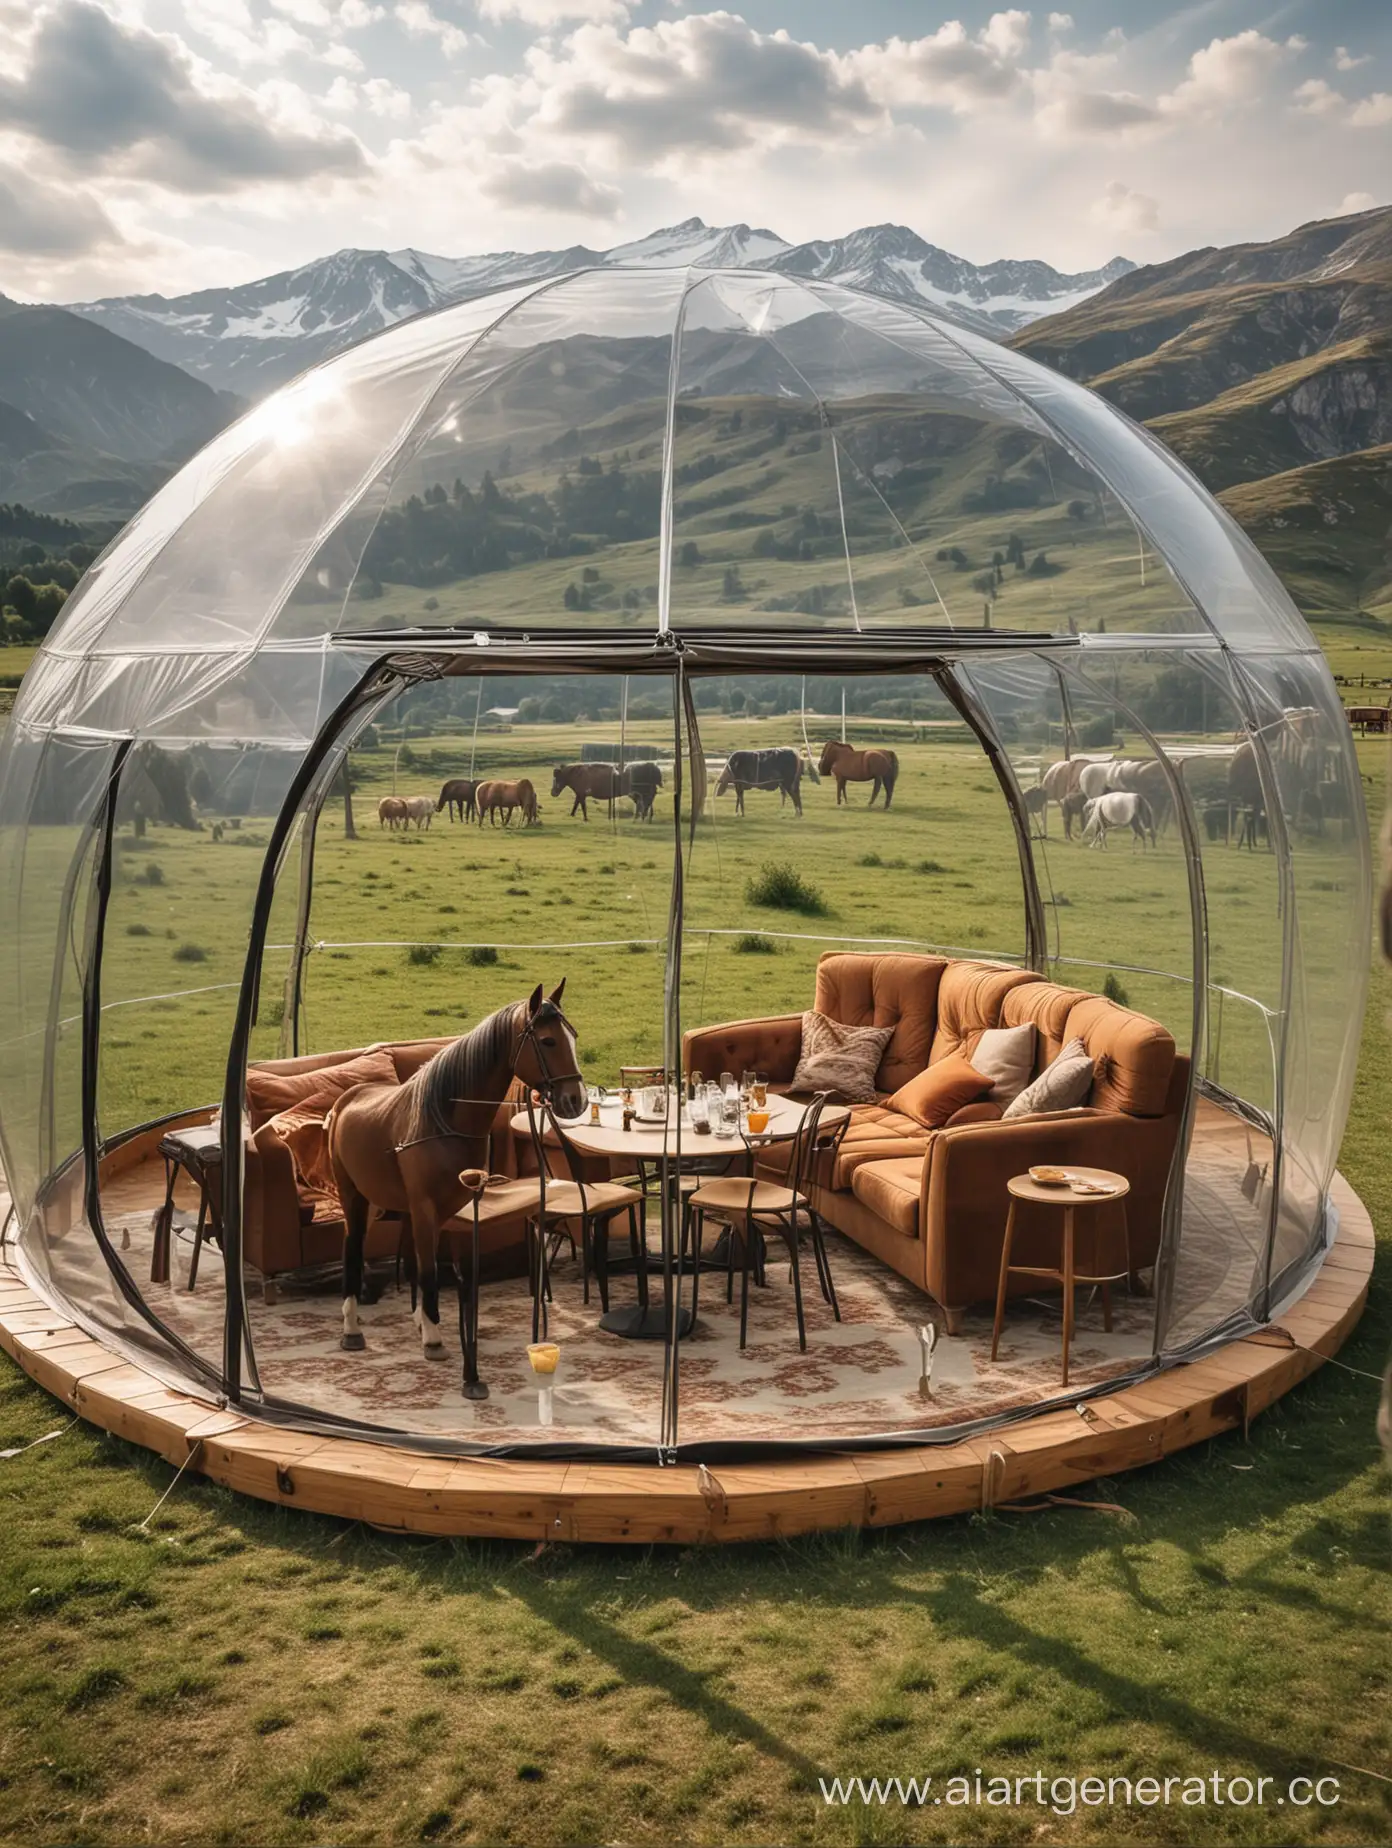 Alpine-Dining-Experience-People-Enjoying-Meals-in-a-Transparent-Tent-Surrounded-by-Majestic-Mountains-and-Grazing-Horses